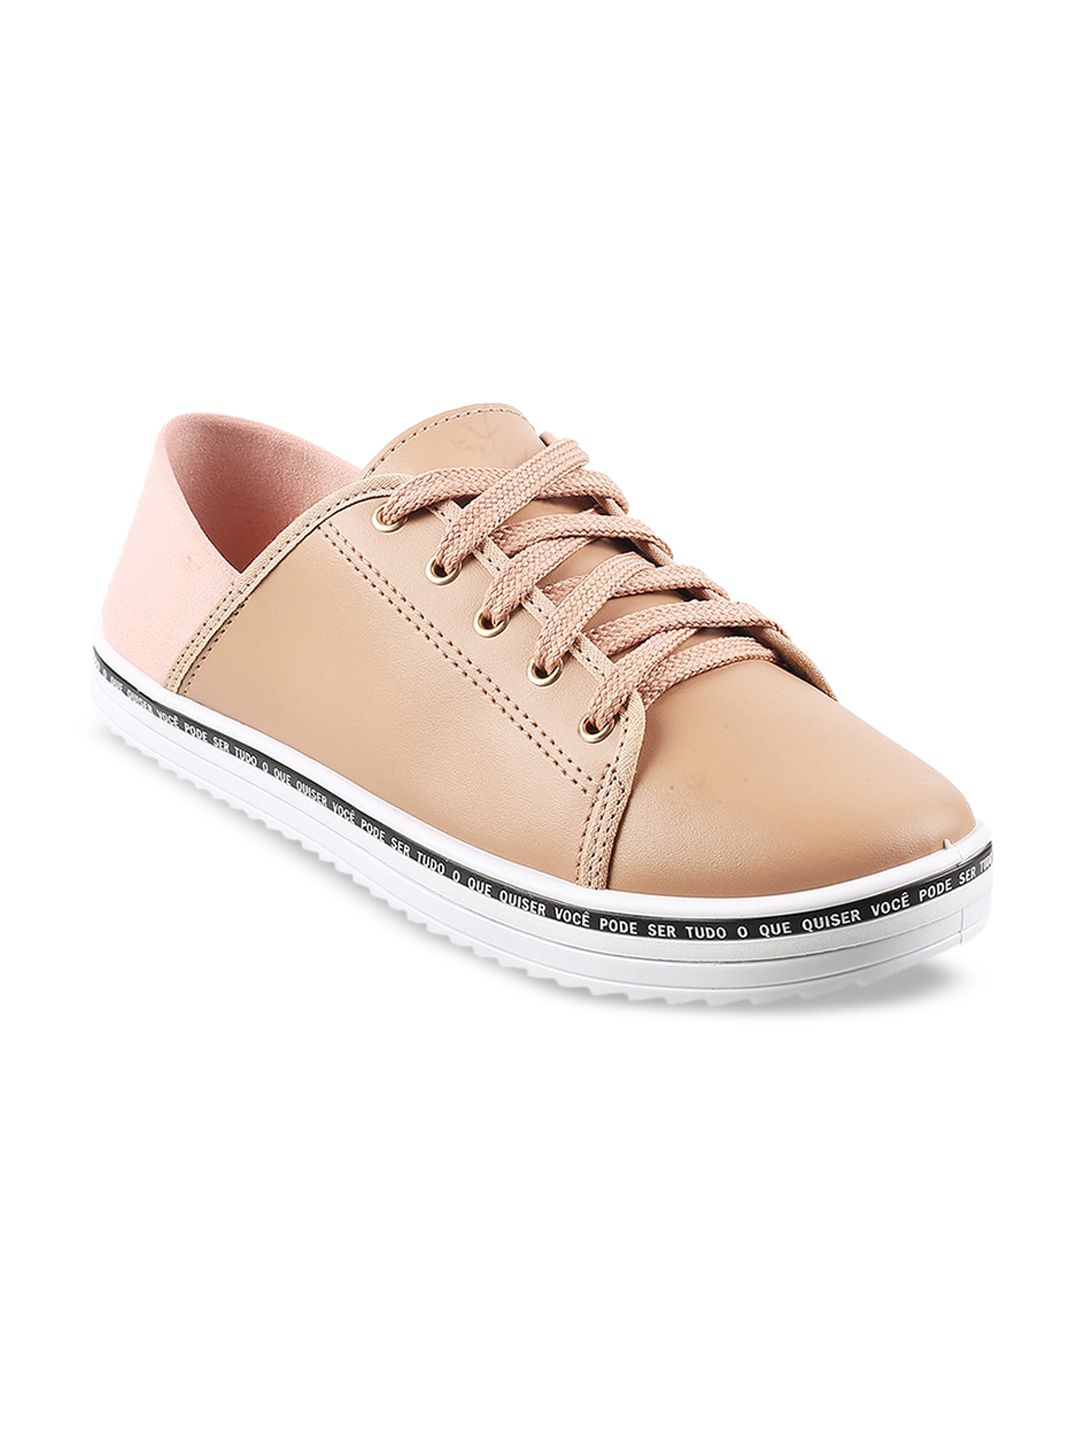 Mochi Women Pink Sneakers Price in India